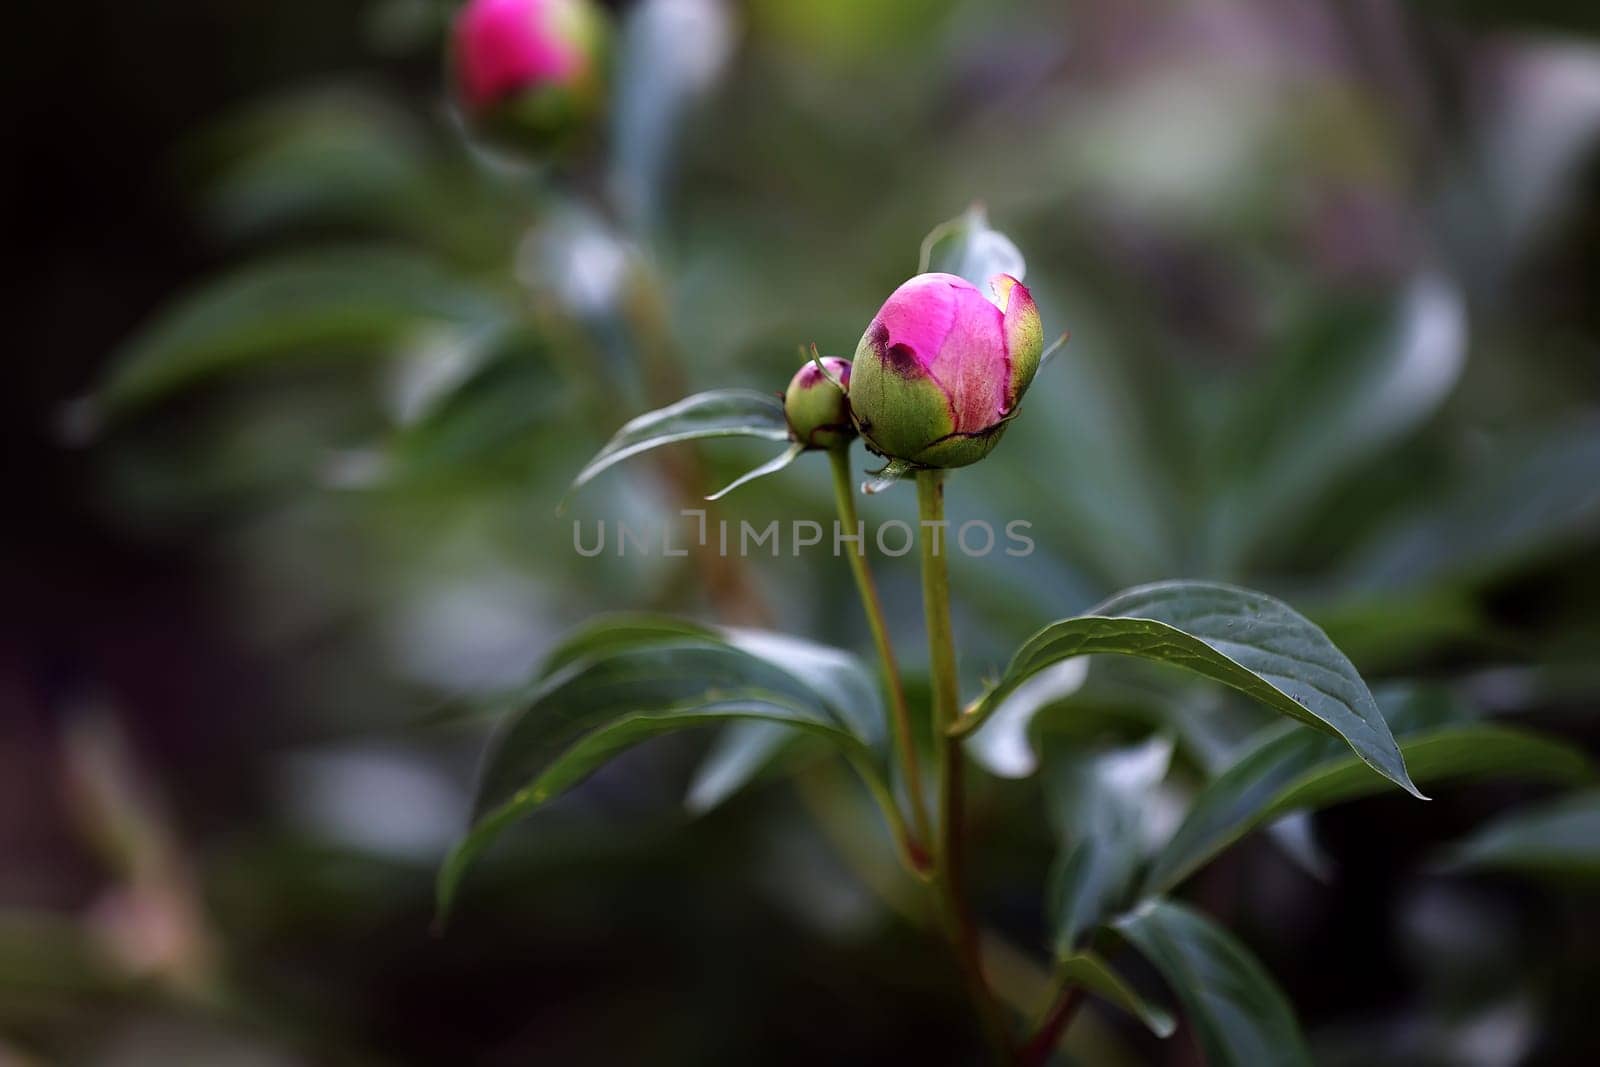 Closed buds of pink peonies in the garden. The beginning of the flowering of peonies.Closed green bud unblown peony. The beginning of the flower bloom cycle